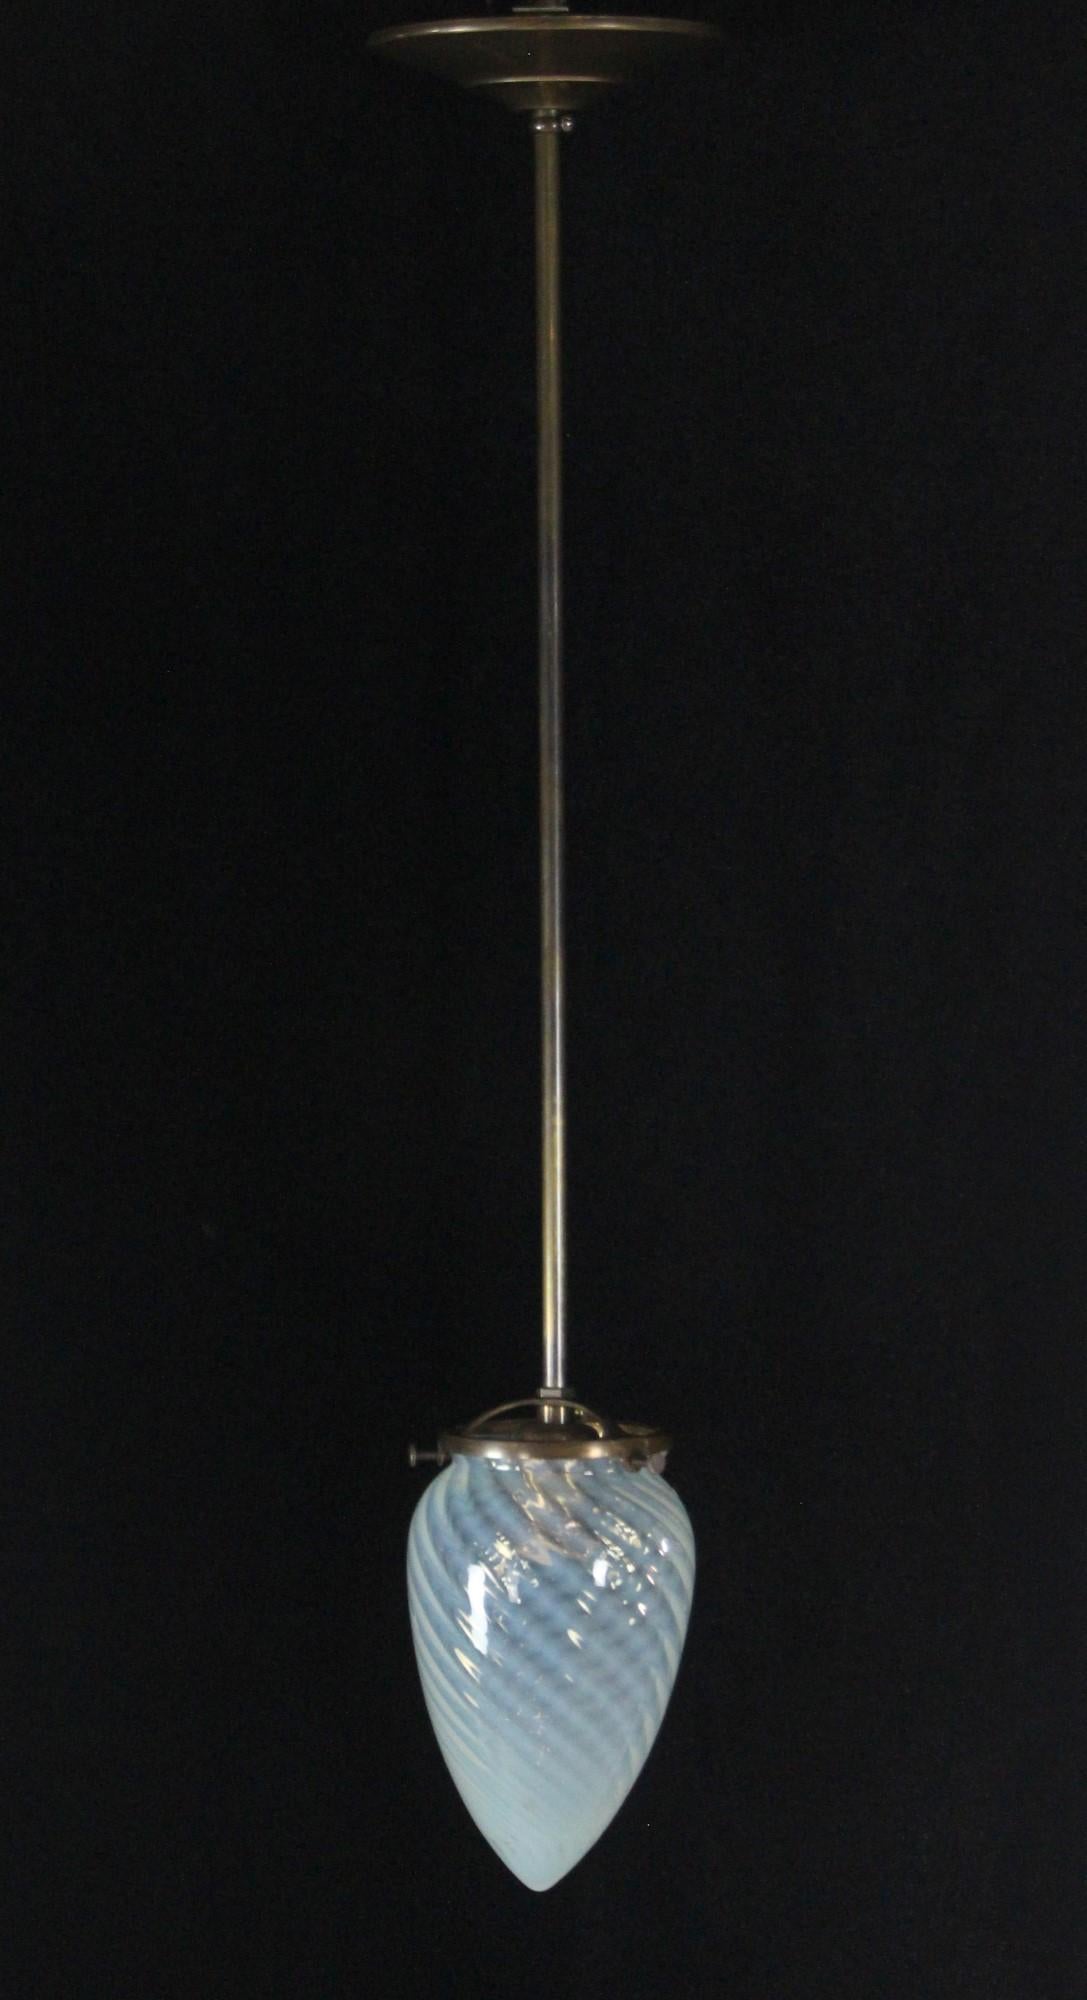 Small cone shaped opalescent glass globe featuring swirled details. Antique brass finish hardware with new wiring round out this pendant light. Please note, this item is located in our Scranton, PA location.